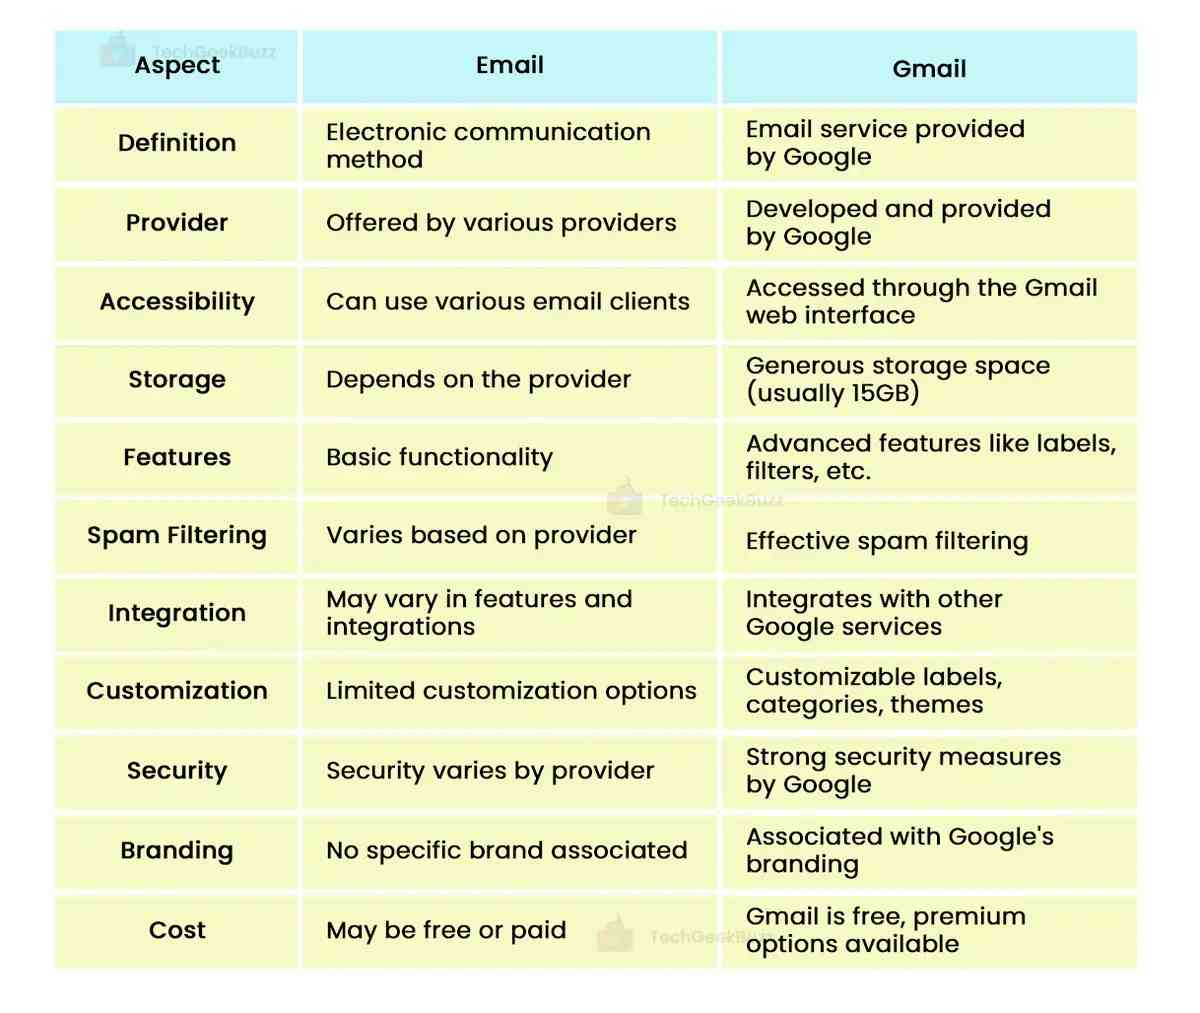 Email vs Gmail